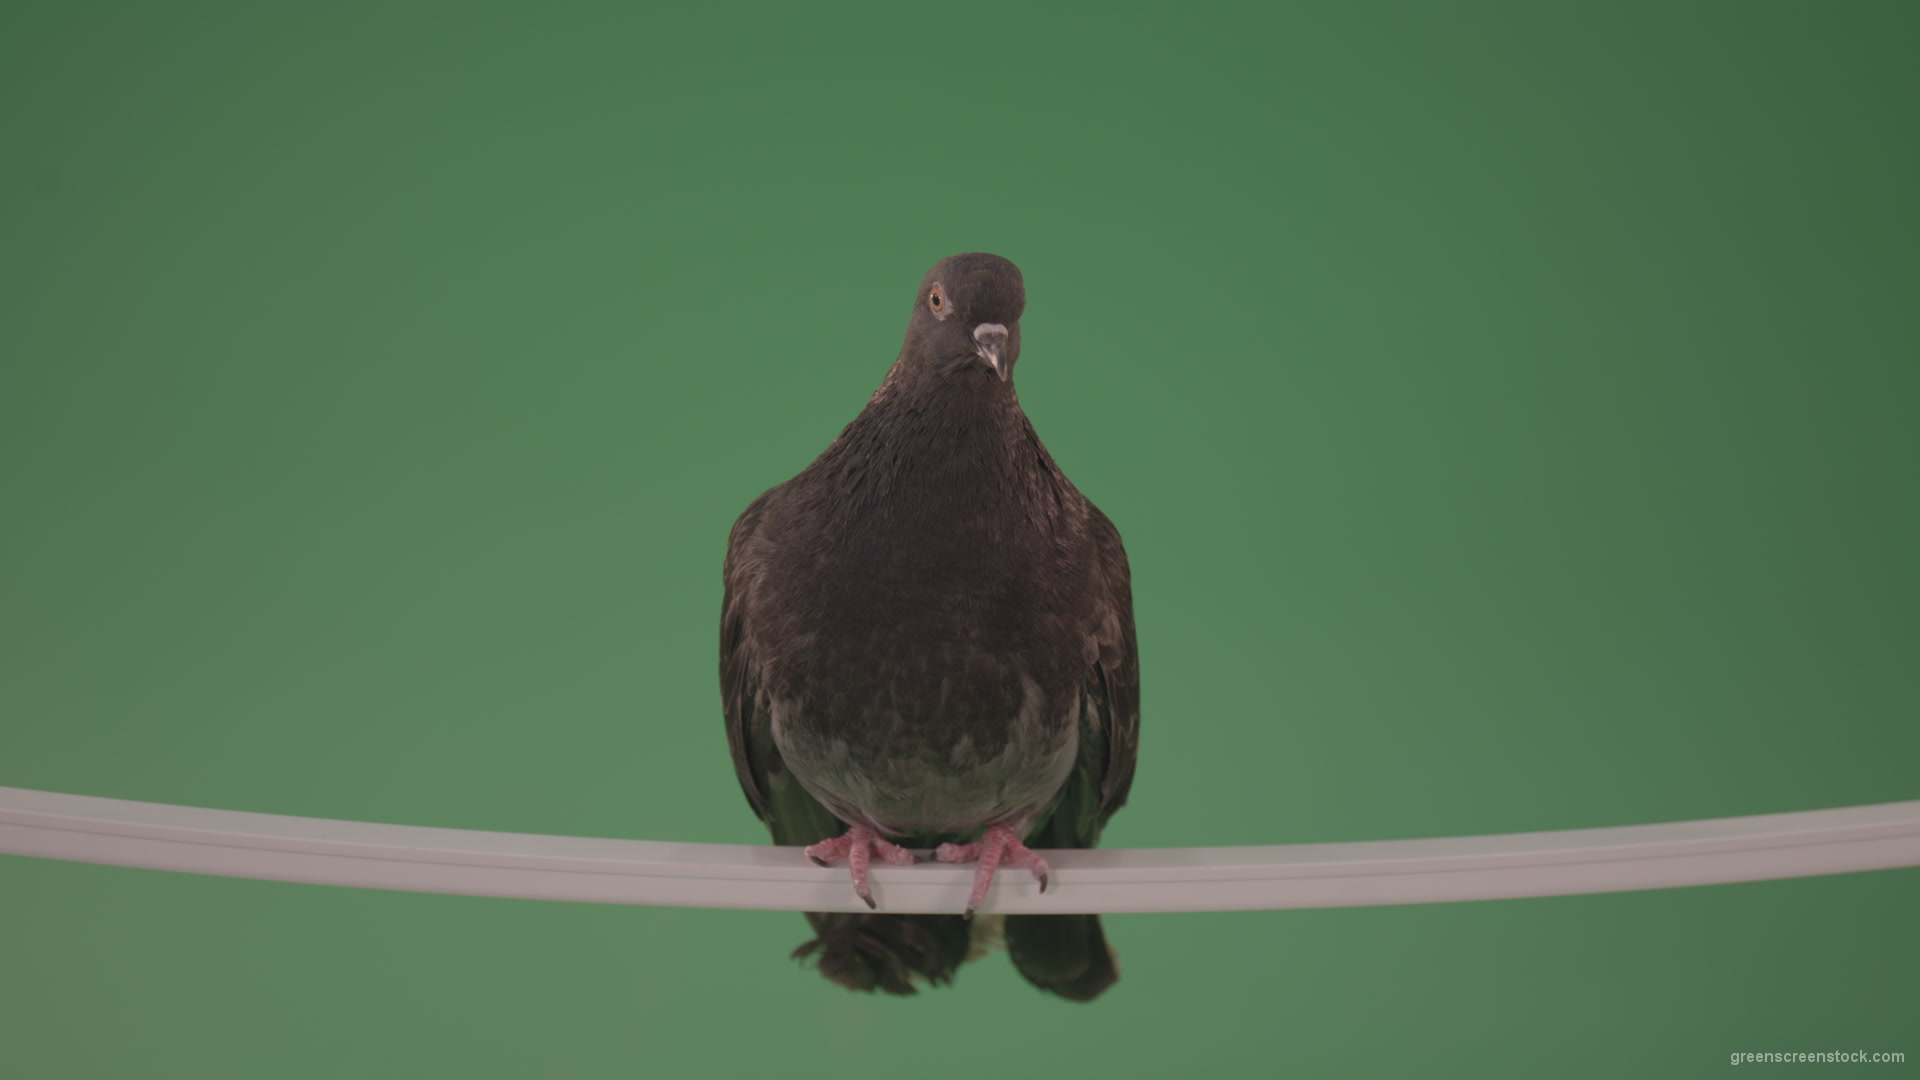 Gray-wild-bird-doves-sitting-on-a-branch-in-the-city-isolated-in-green-screen-studio_006 Green Screen Stock